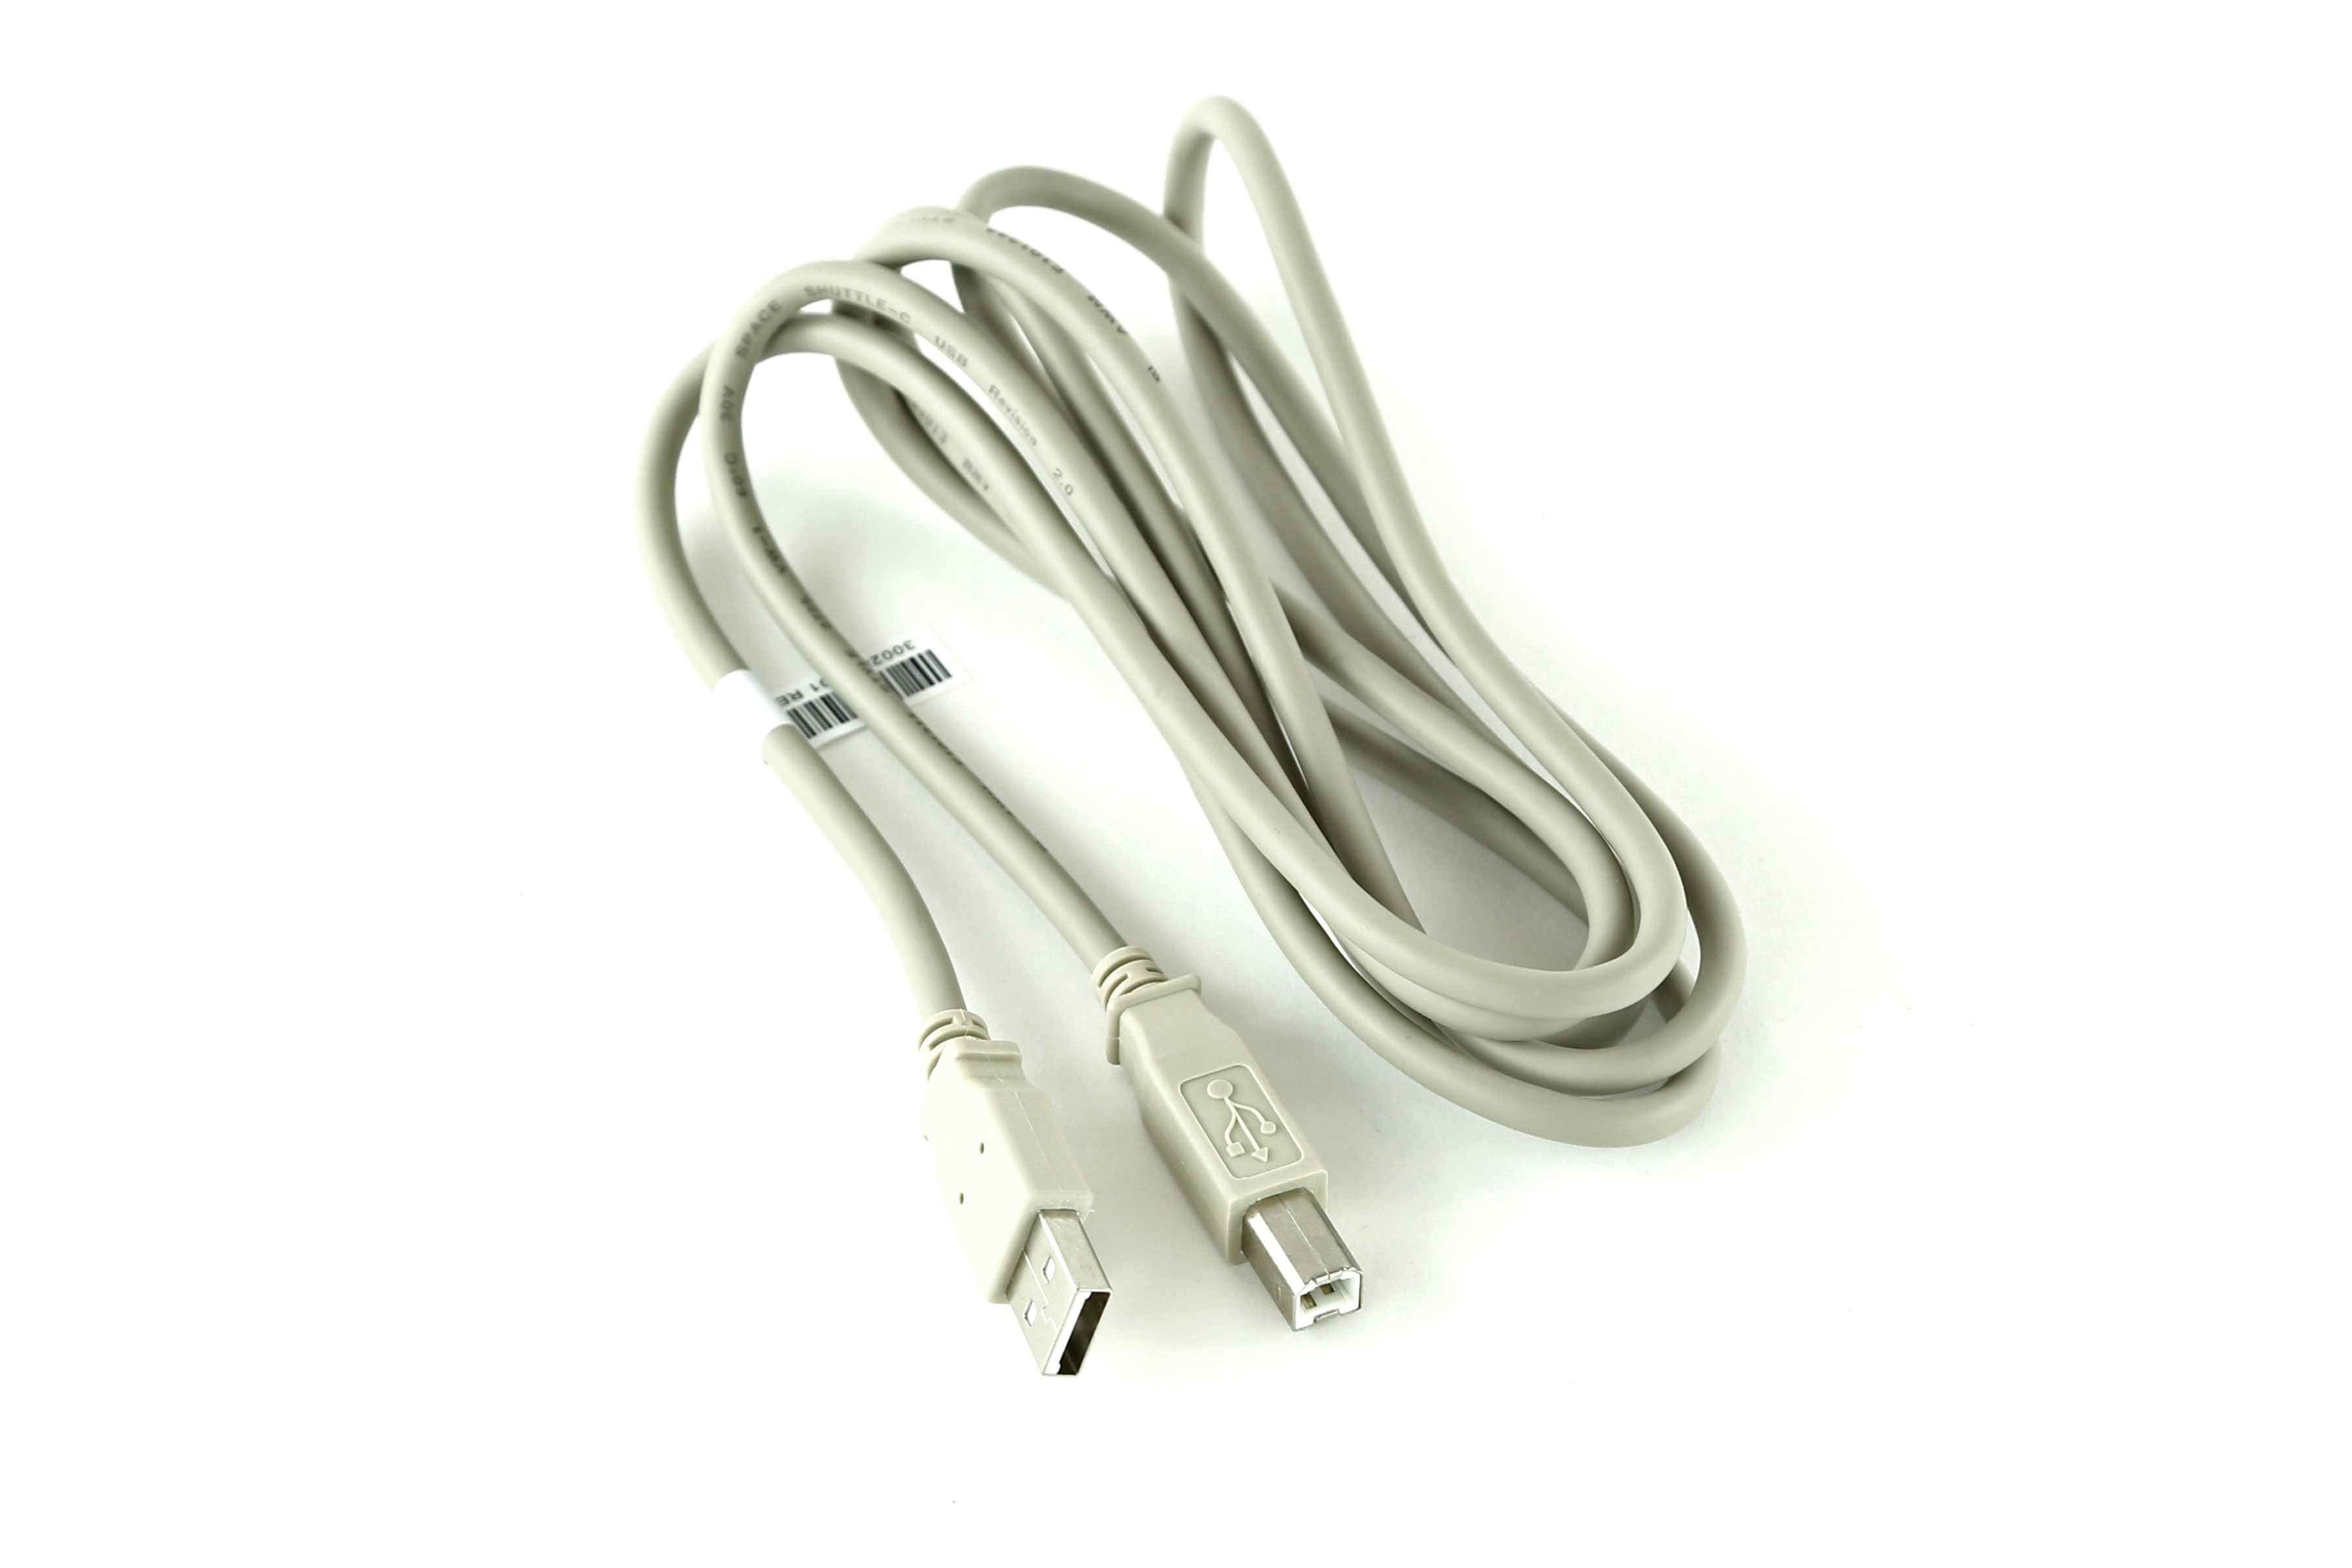 Standard Printer Cable with USB 3:2